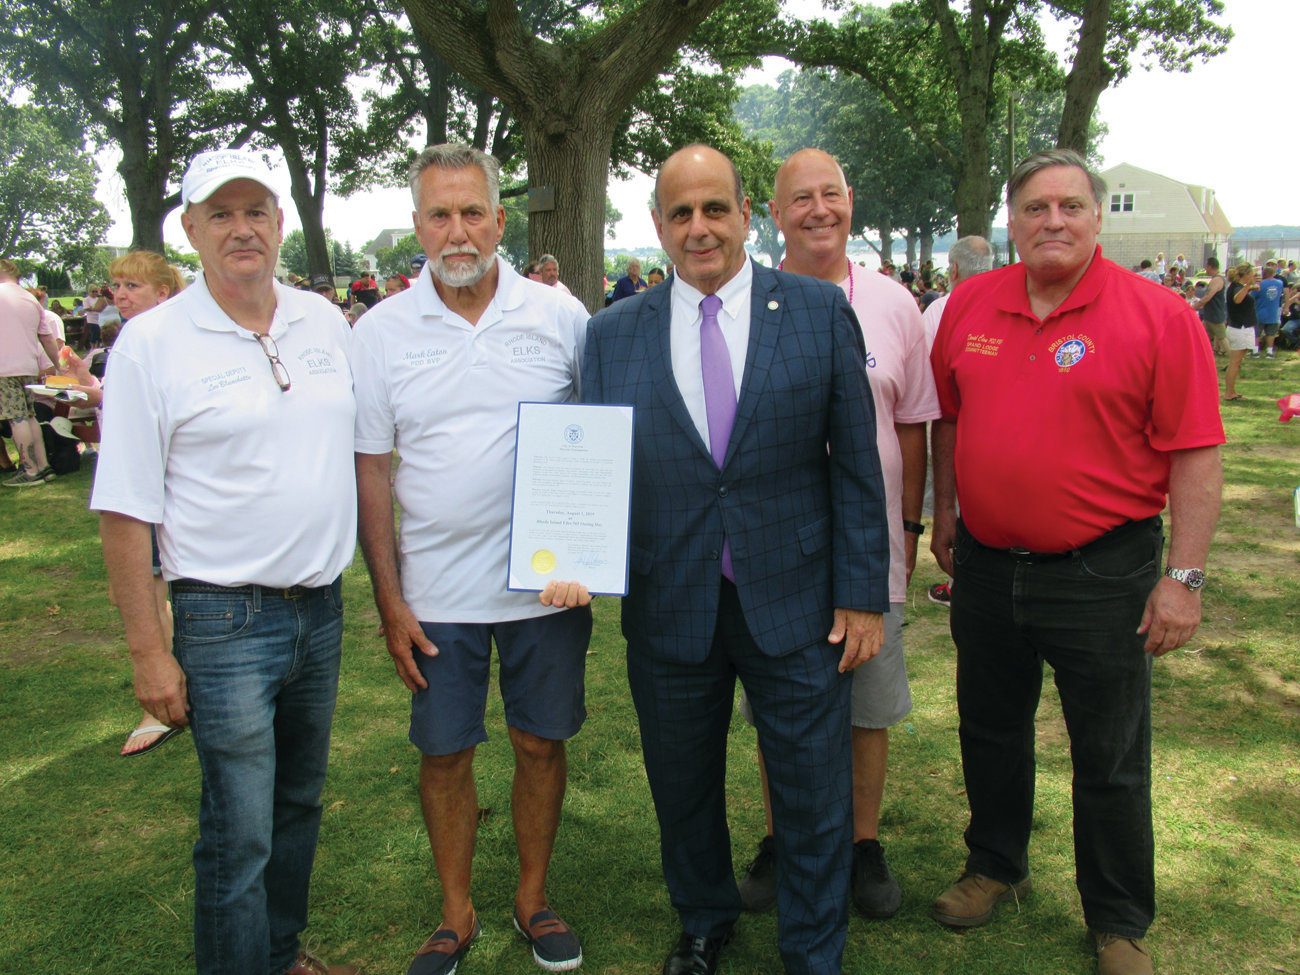 FANTASTIC FIRST: Mayor Joseph J. Solomon presented a proclamation to RI Elks officials Leo Blanchette, Mark Eaton, Tom Kramer and David Cioe that declared Thursday, August 1, 2019 as Rhode Island Elks-365 Outing Day in Warwick.